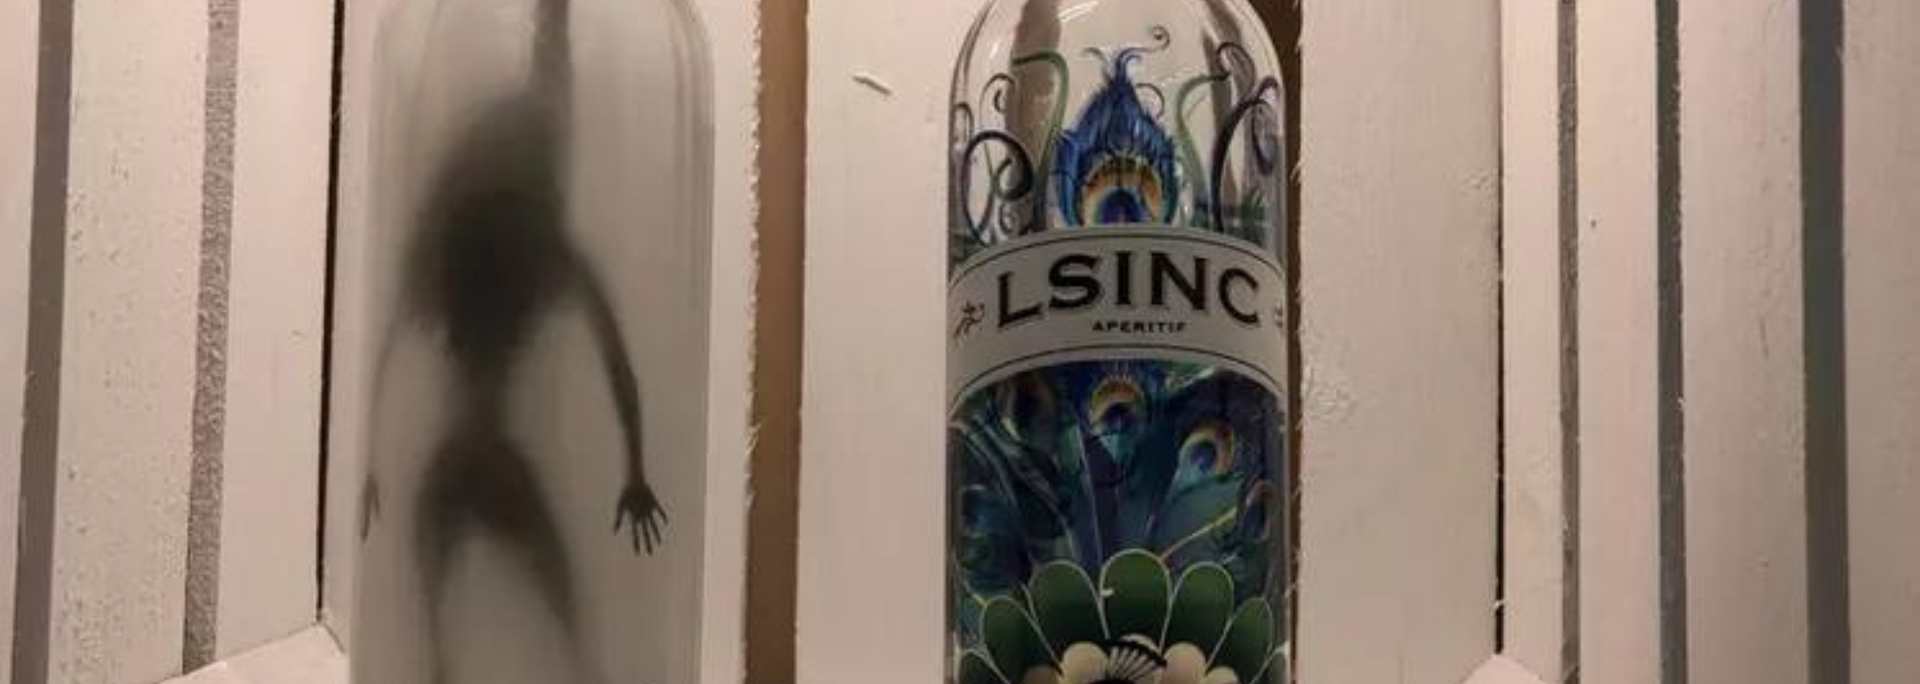 Picture of a printed bottle.